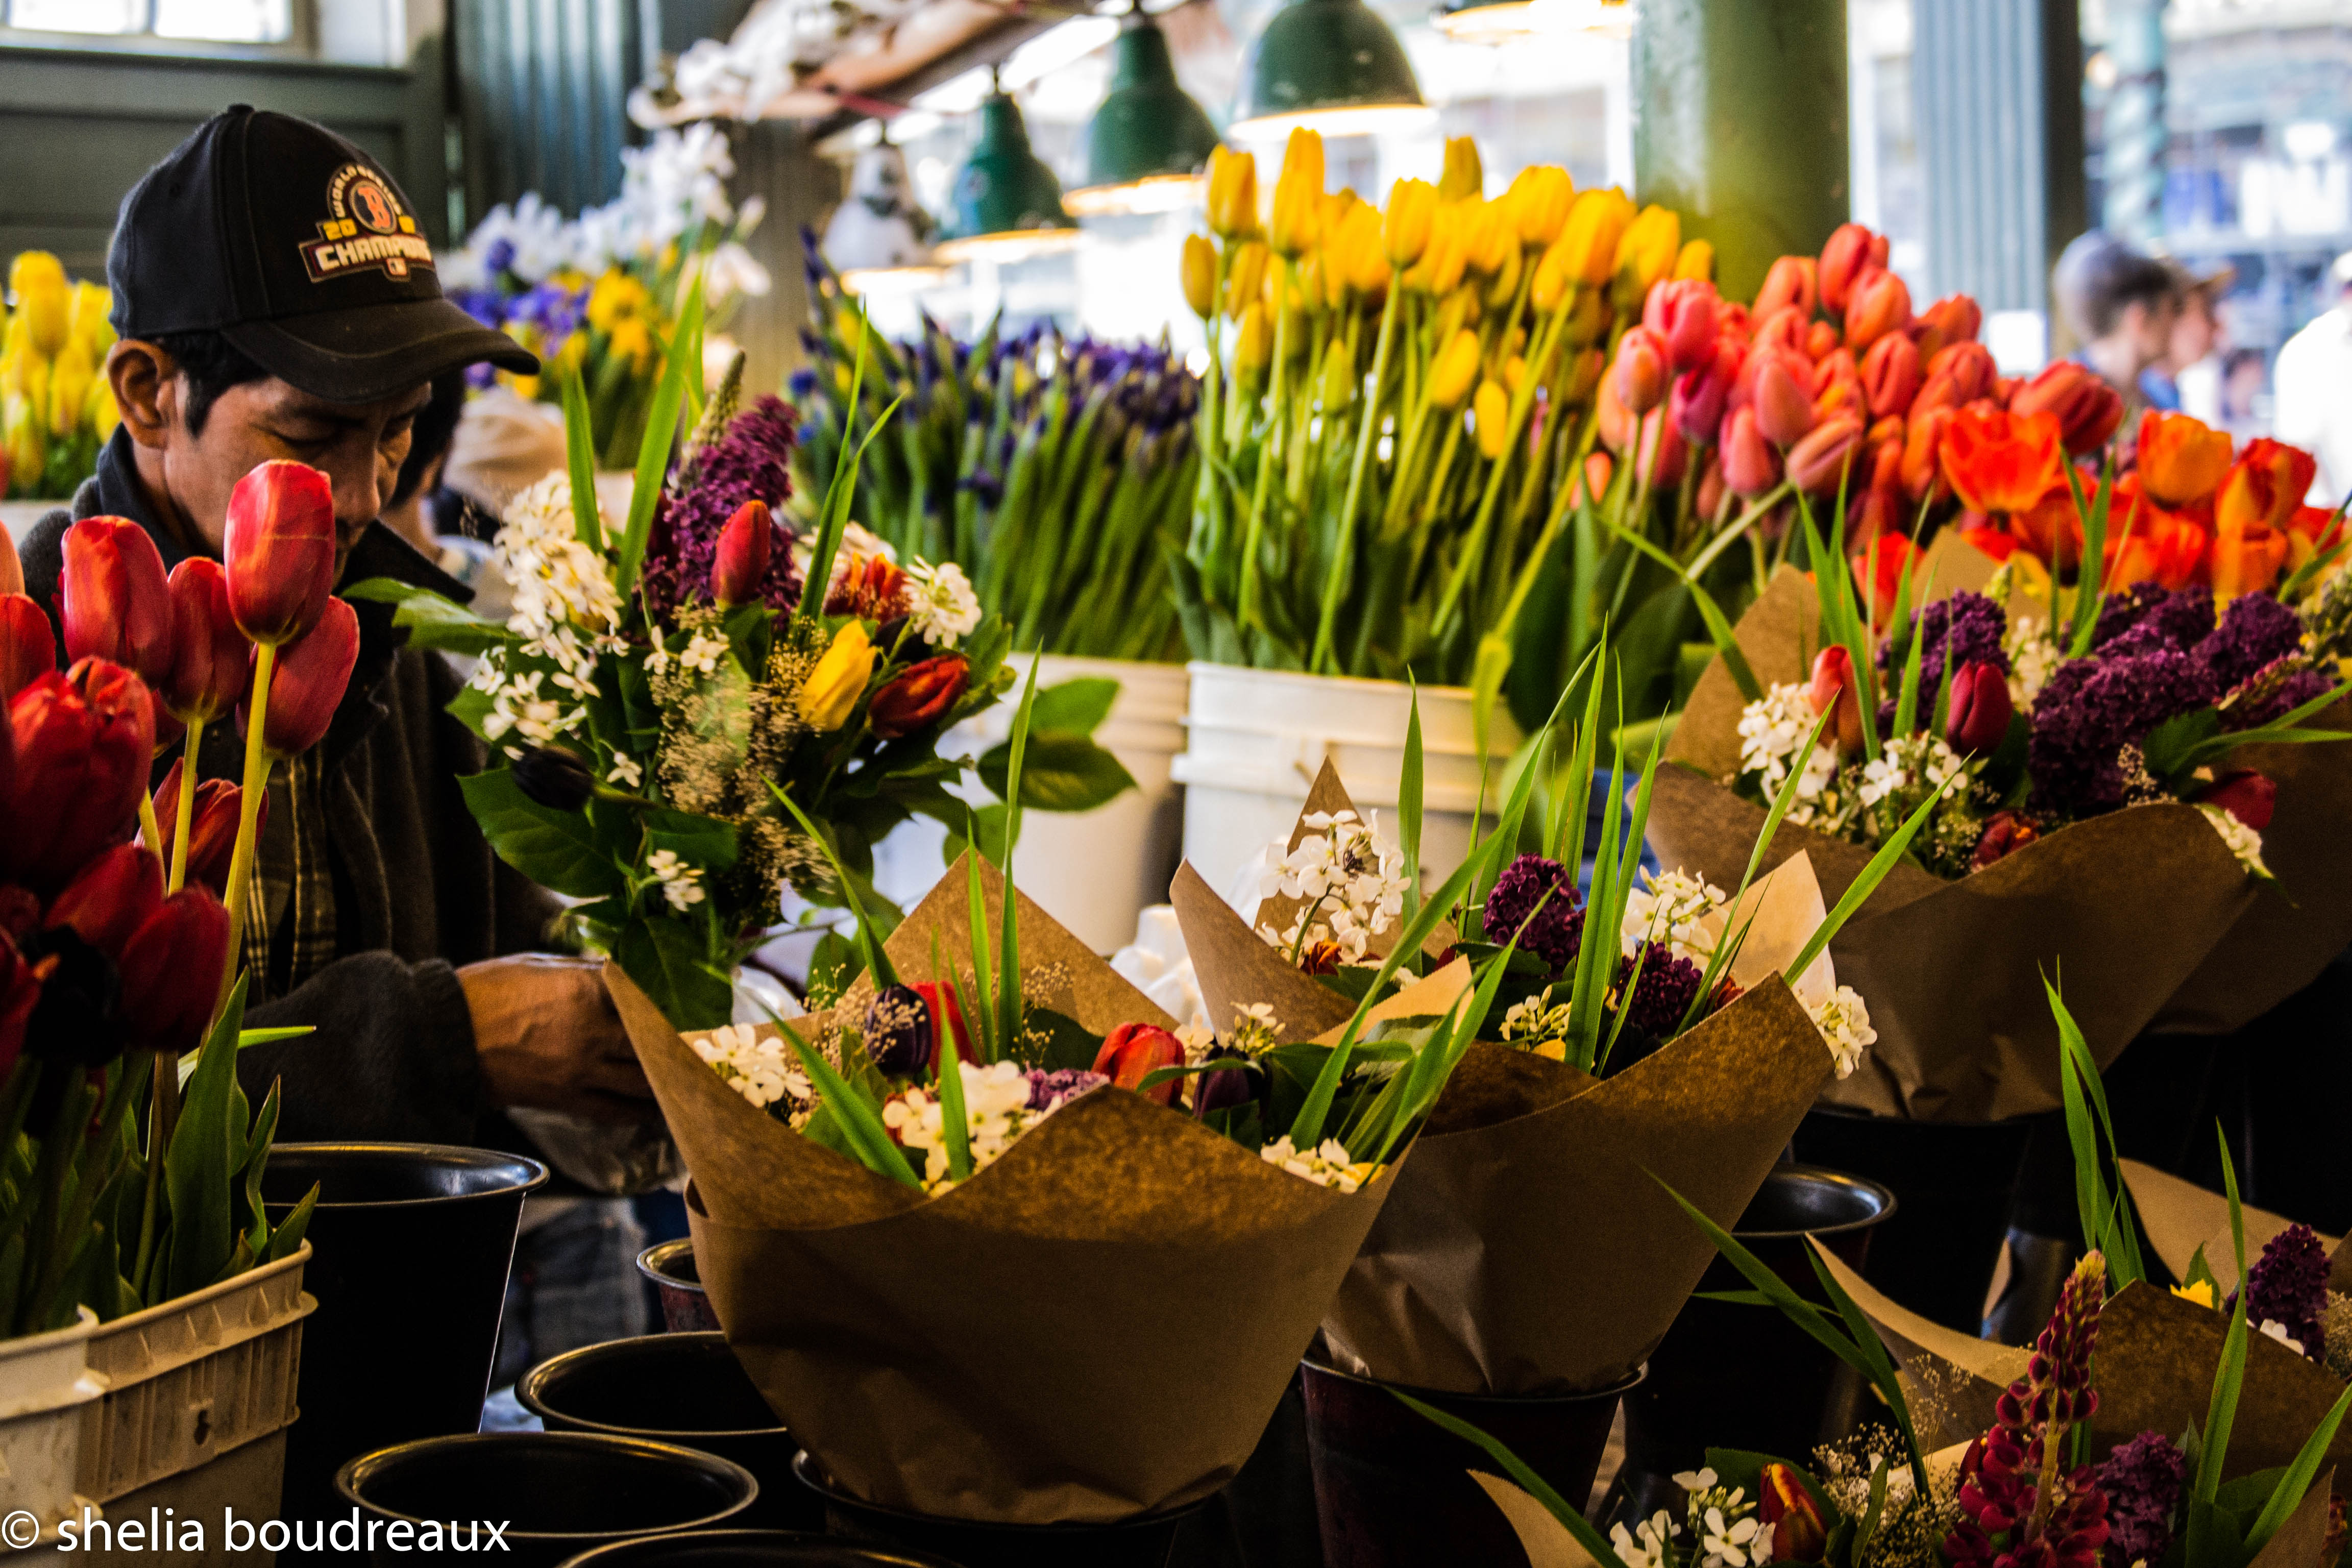 The big thing at the public market is the flowers. They are beautiful and everywhere to buy! 